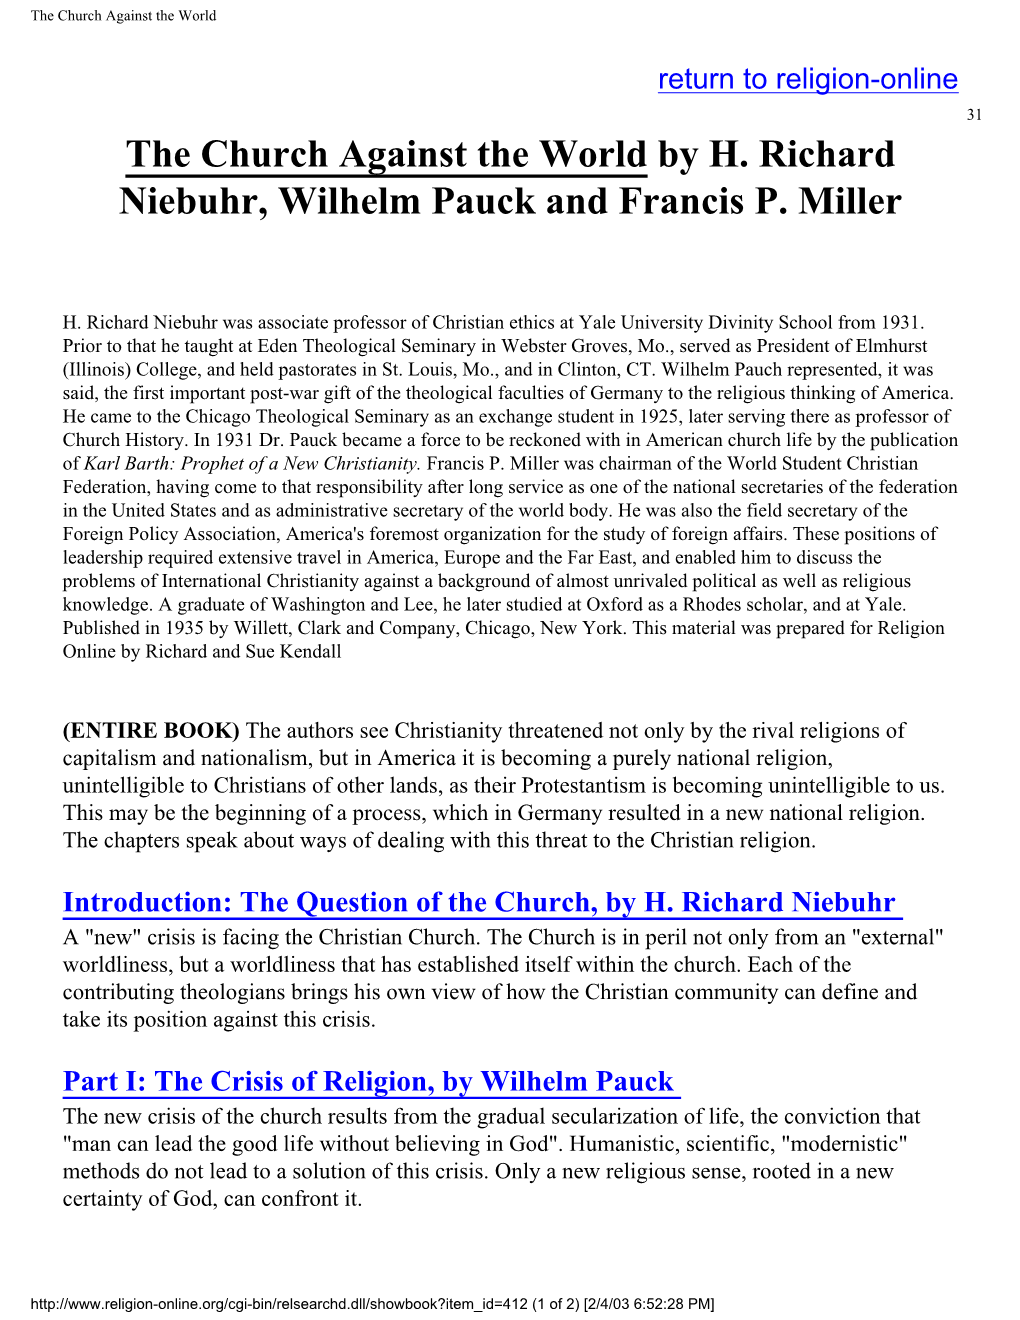 The Church Against the World by H. Richard Niebuhr, Wilhelm Pauck and Francis P